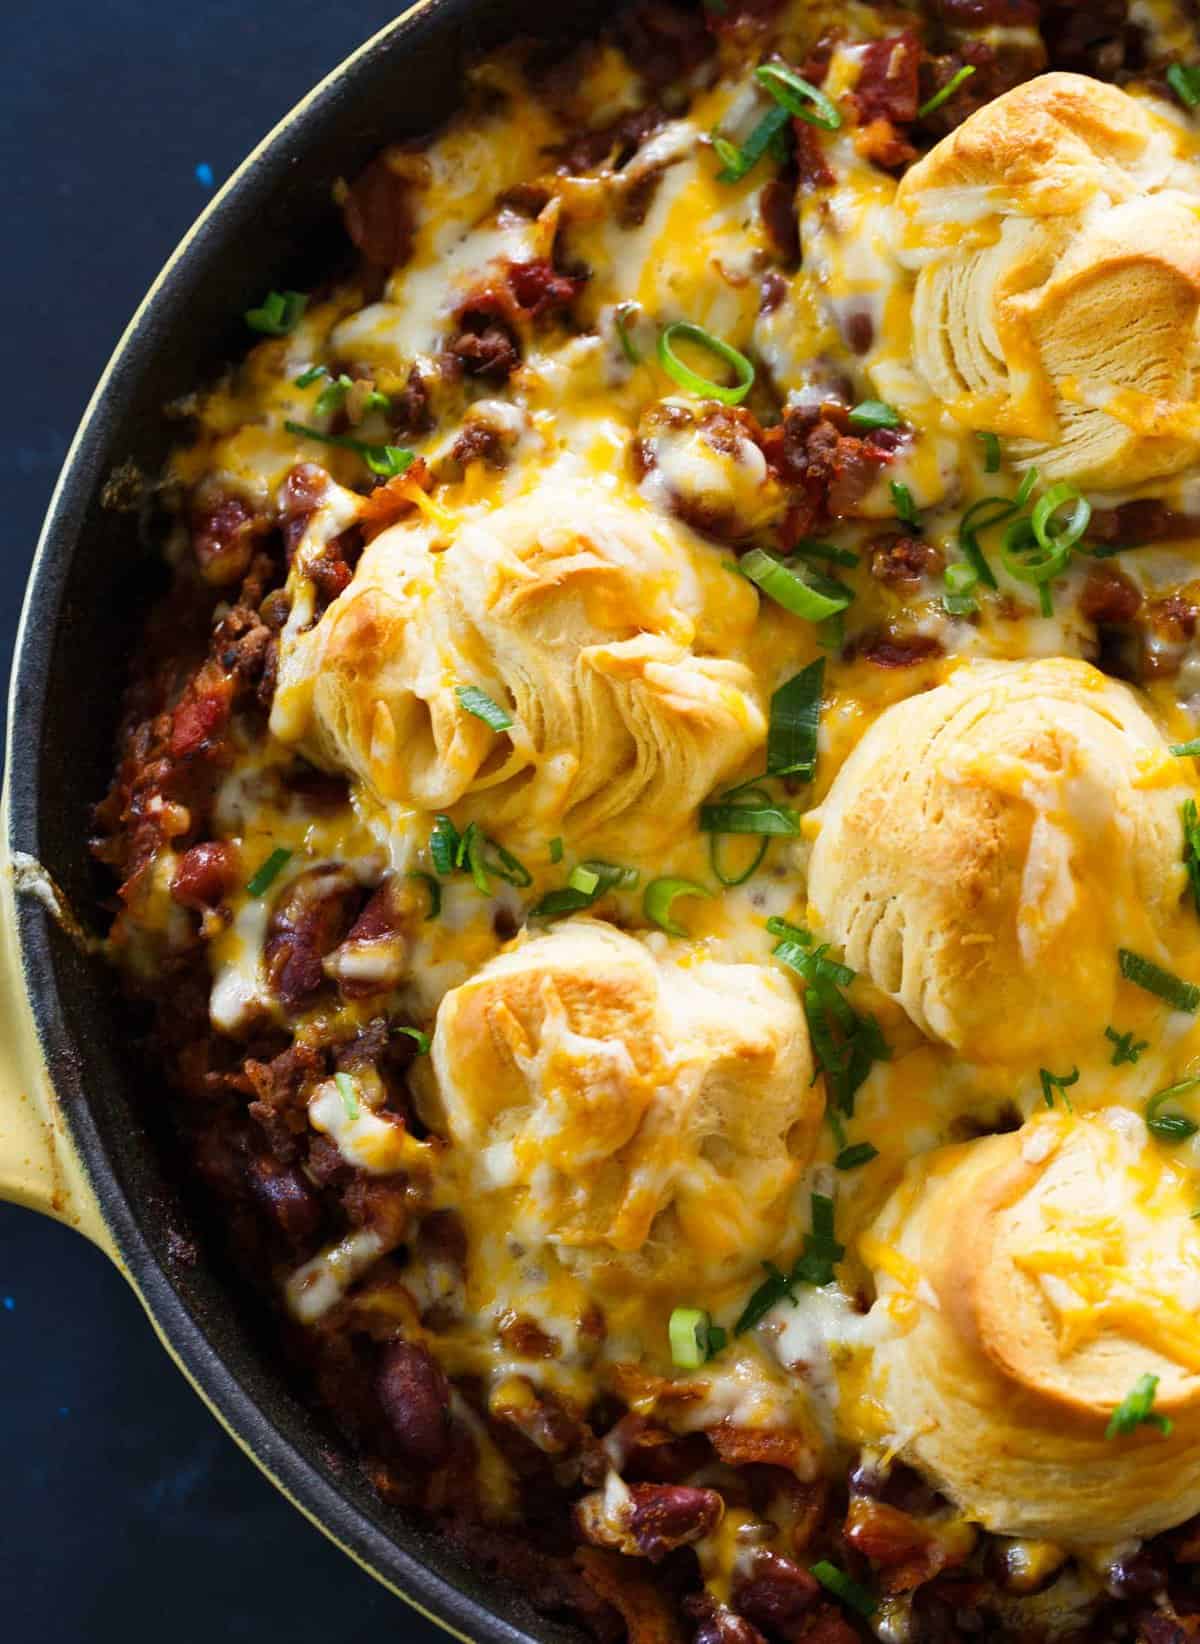 Pure comfort food is right here. Frito pie chili biscuit skillet has your name written all over it if you are looking for something that will stick to your ribs! Chili topped with fritos, cheese, and biscuits — what more could you ask for?!